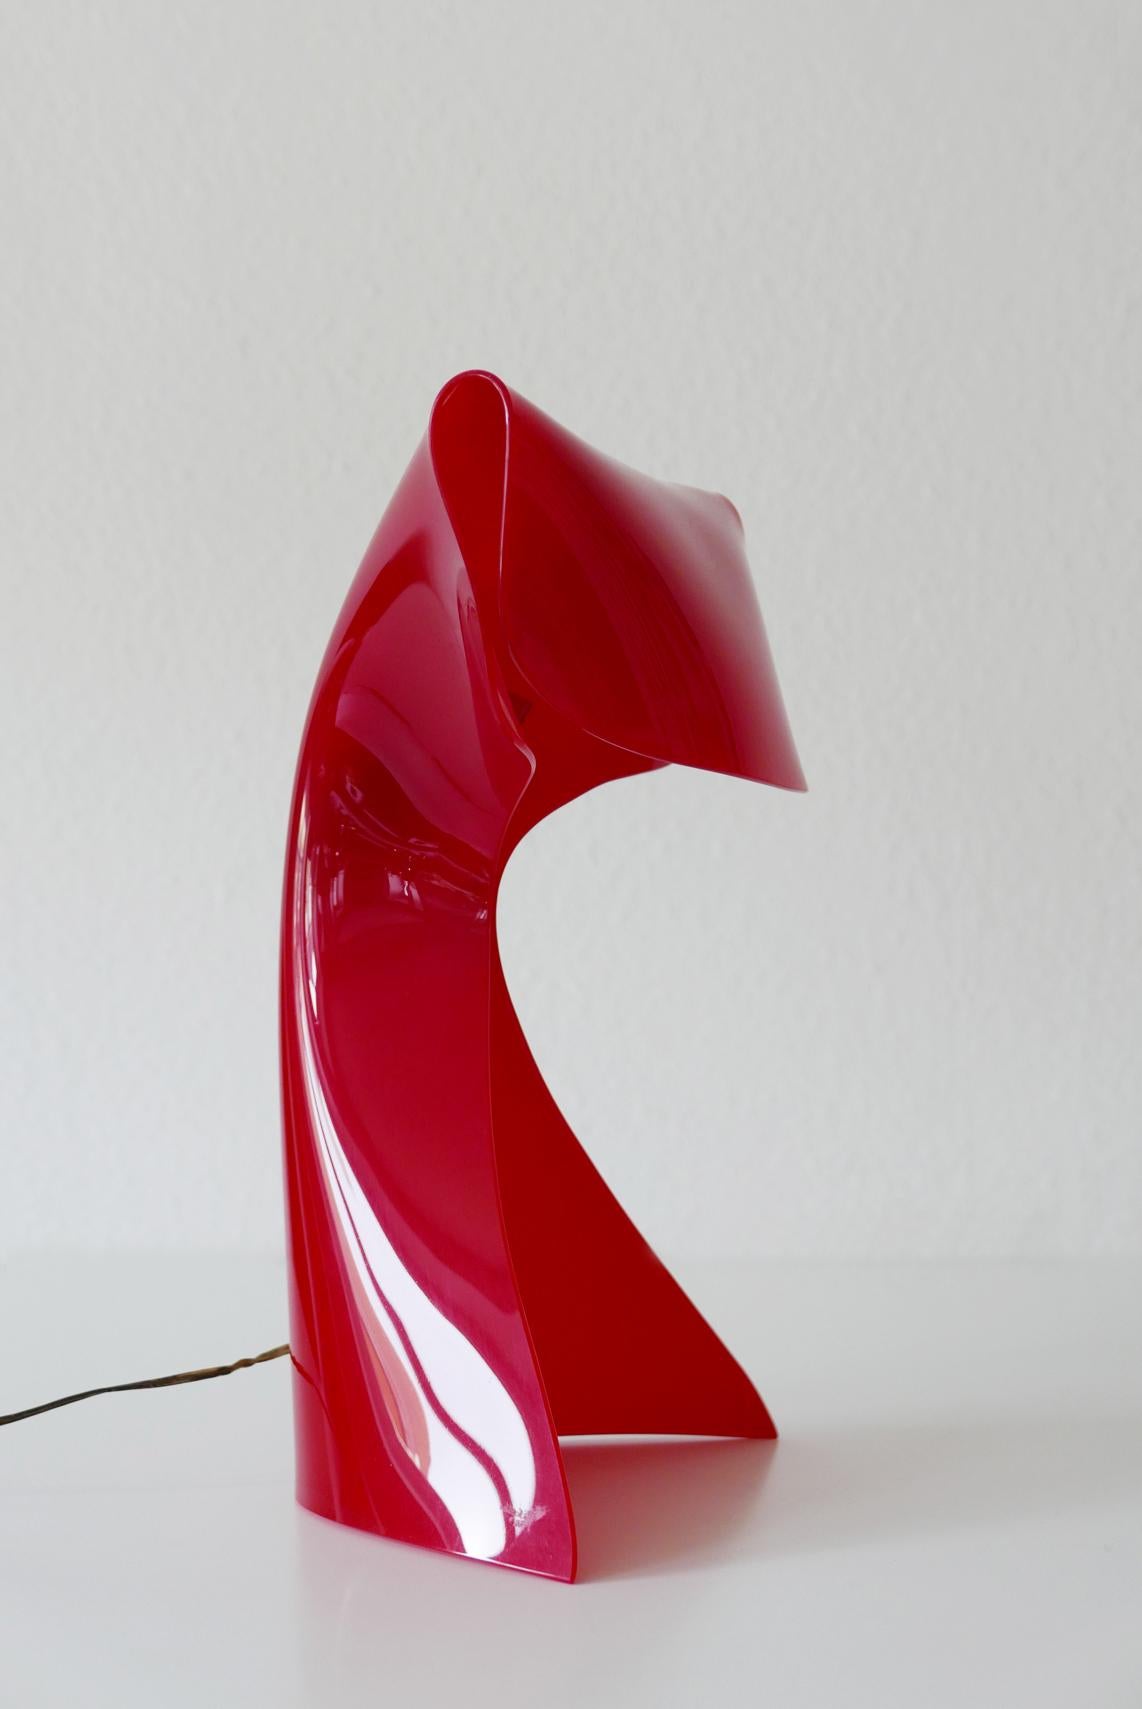 Exceptional Table Lamp by Hanns Hoffmann-Lederer for Heinz Hecht, 1950s, Germany For Sale 6